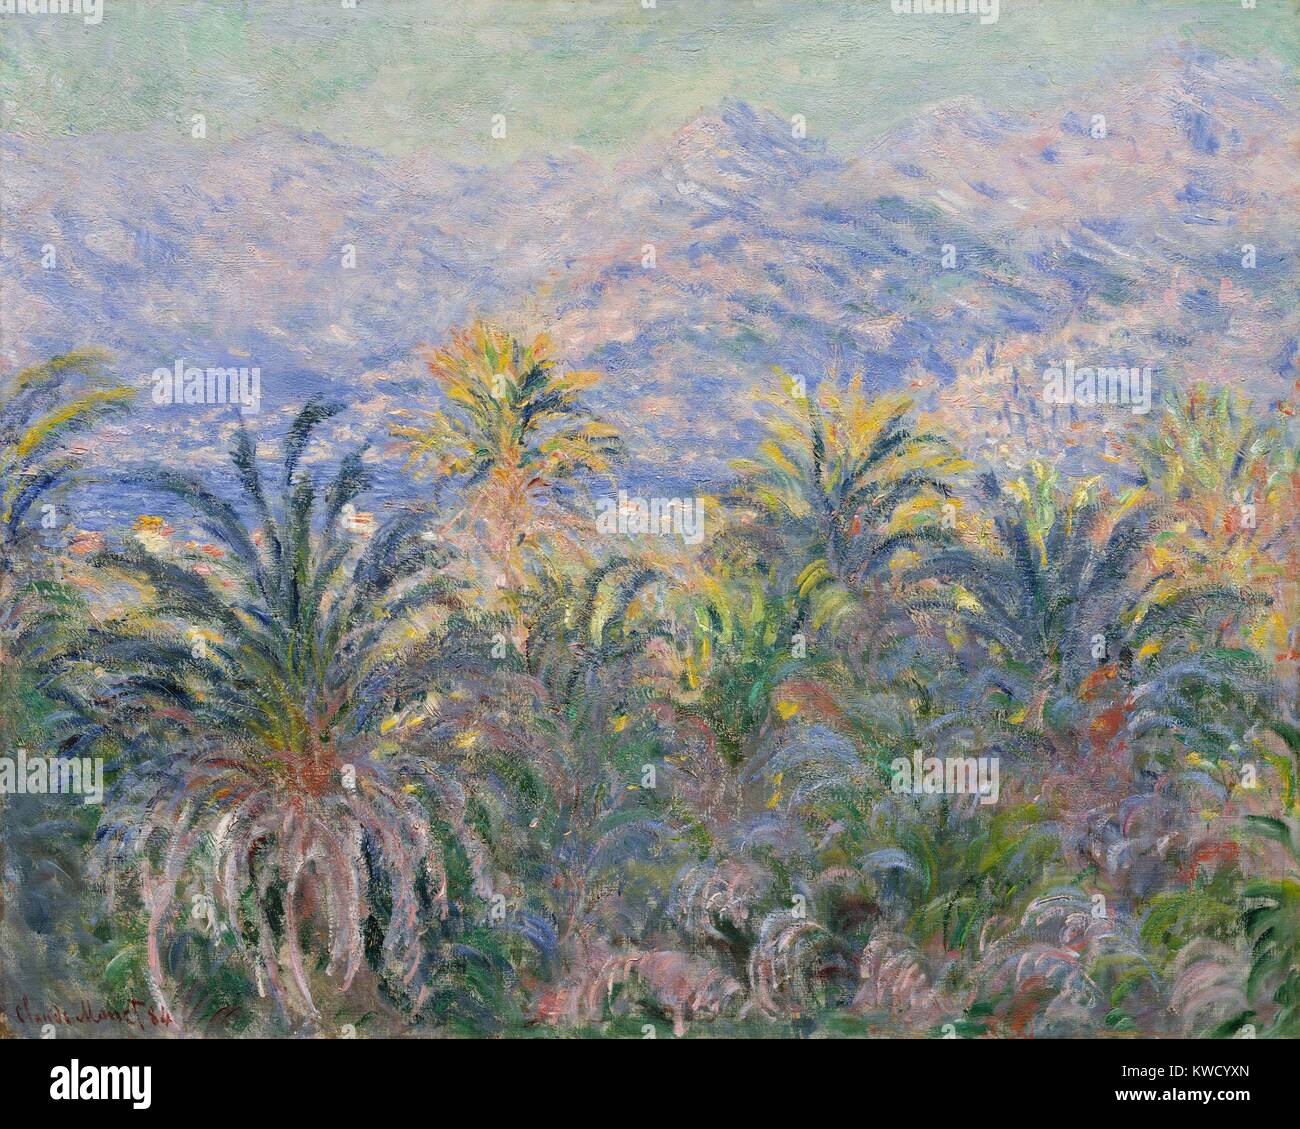 Palm Trees at Bordighera, by Claude Monet, 1884, French impressionist painting, oil on canvas. Monet painted this in the Italian Riviera, looking west across the Bay of Ventimiglia and toward the Maritime Alps (BSLOC 2017 3 37) Stock Photo